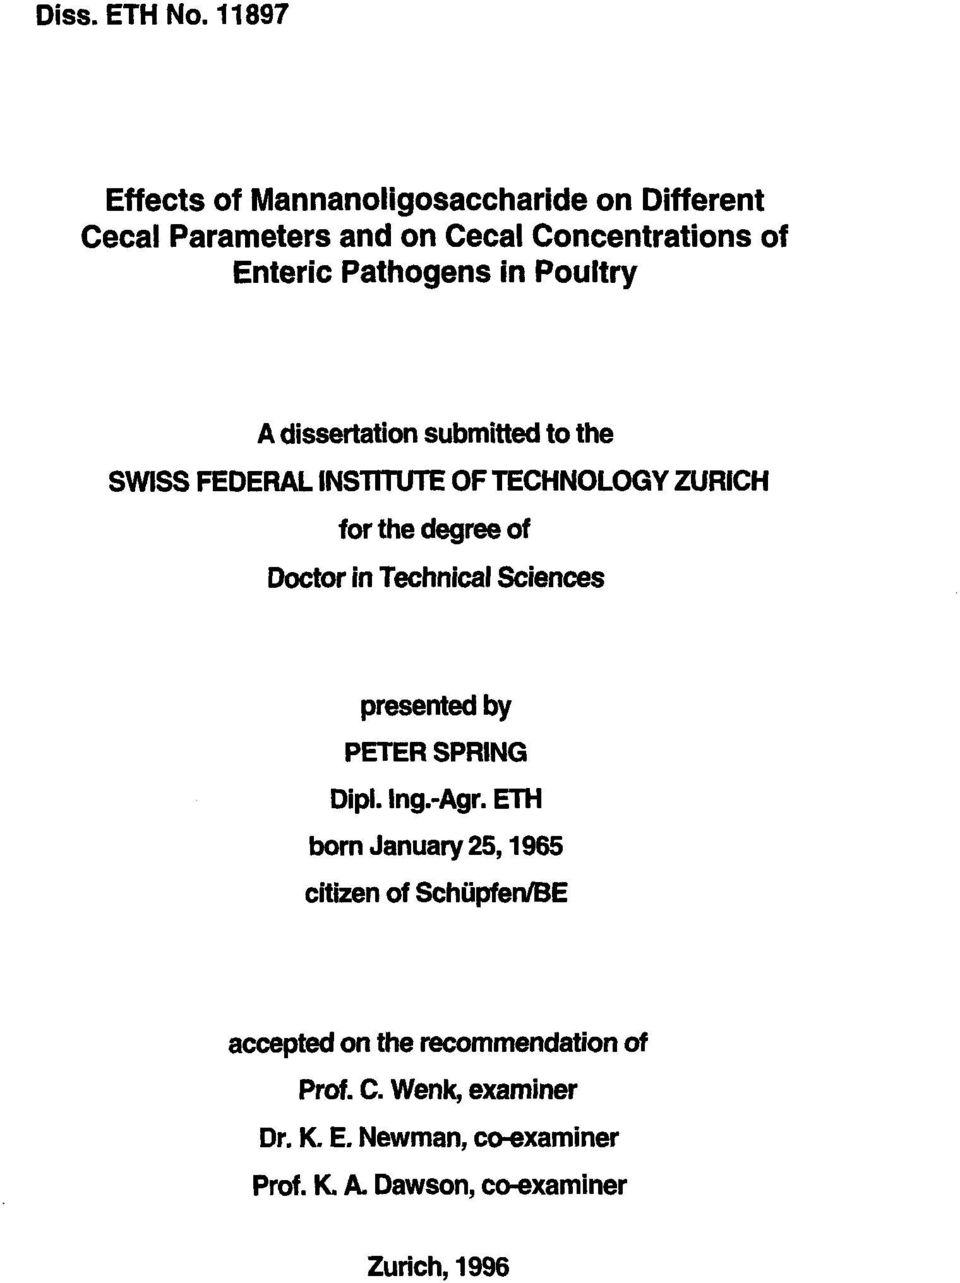 Poultry A dissertation submitted to the SWISS FEDERAL INSTITUTE OF TECHNOLOGY ZURICH for the degree of Doctor in Technical